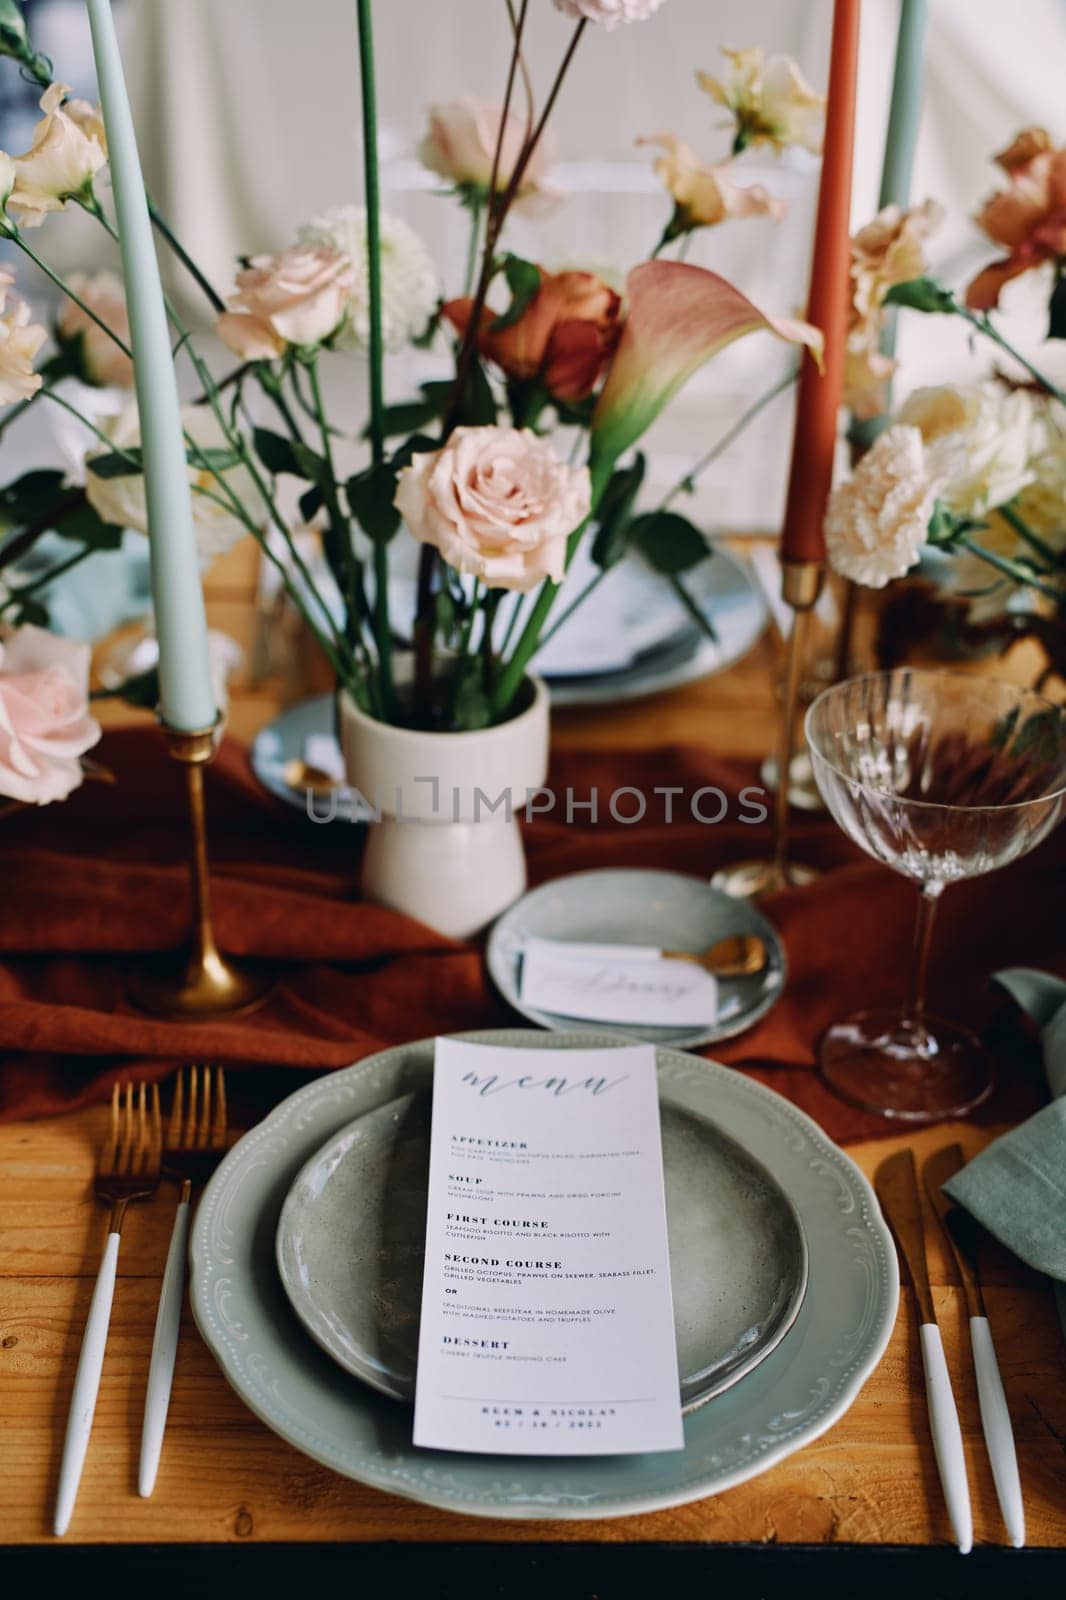 Festive menu lies on a plate on a served table near a bouquet of flowers by Nadtochiy